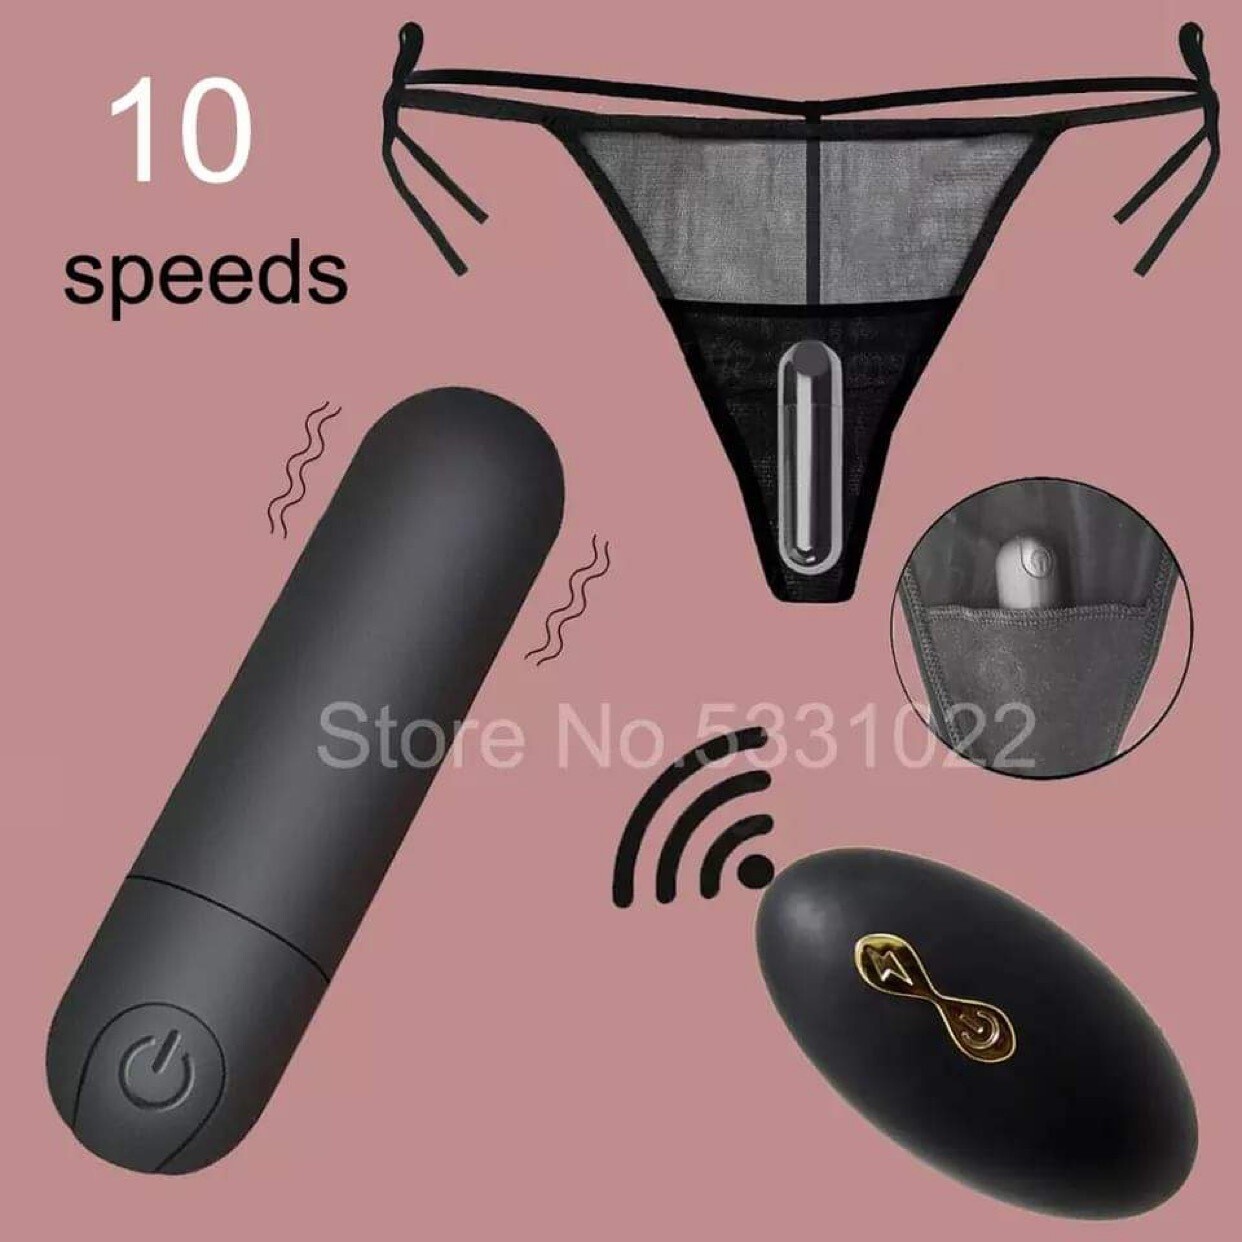 Vibrating Panties 10 Function Wireless Remote Control Rechargeable Bullet Vibrator Strap on Underwear Vibrator for Women Sex